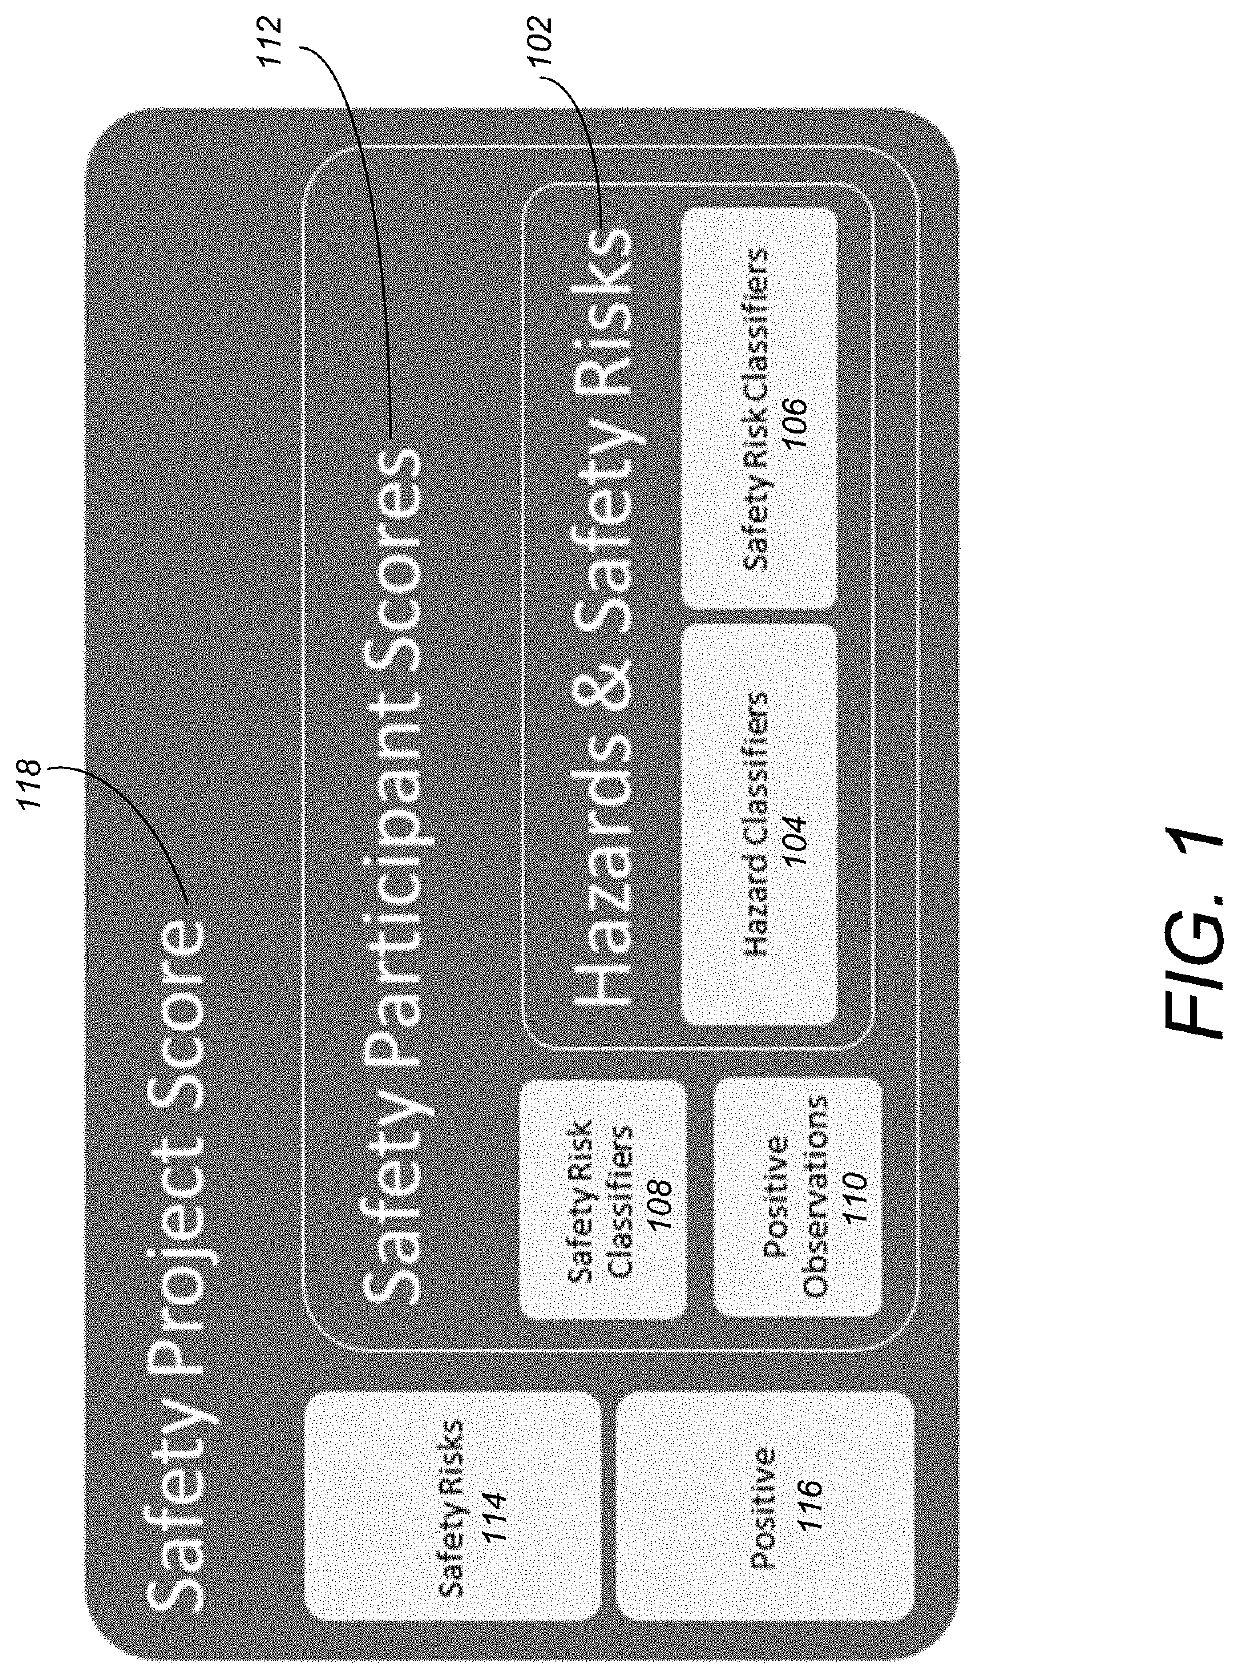 Architecture, engineering and construction (AEC) construction safety risk analysis system and method for interactive visualization and capture